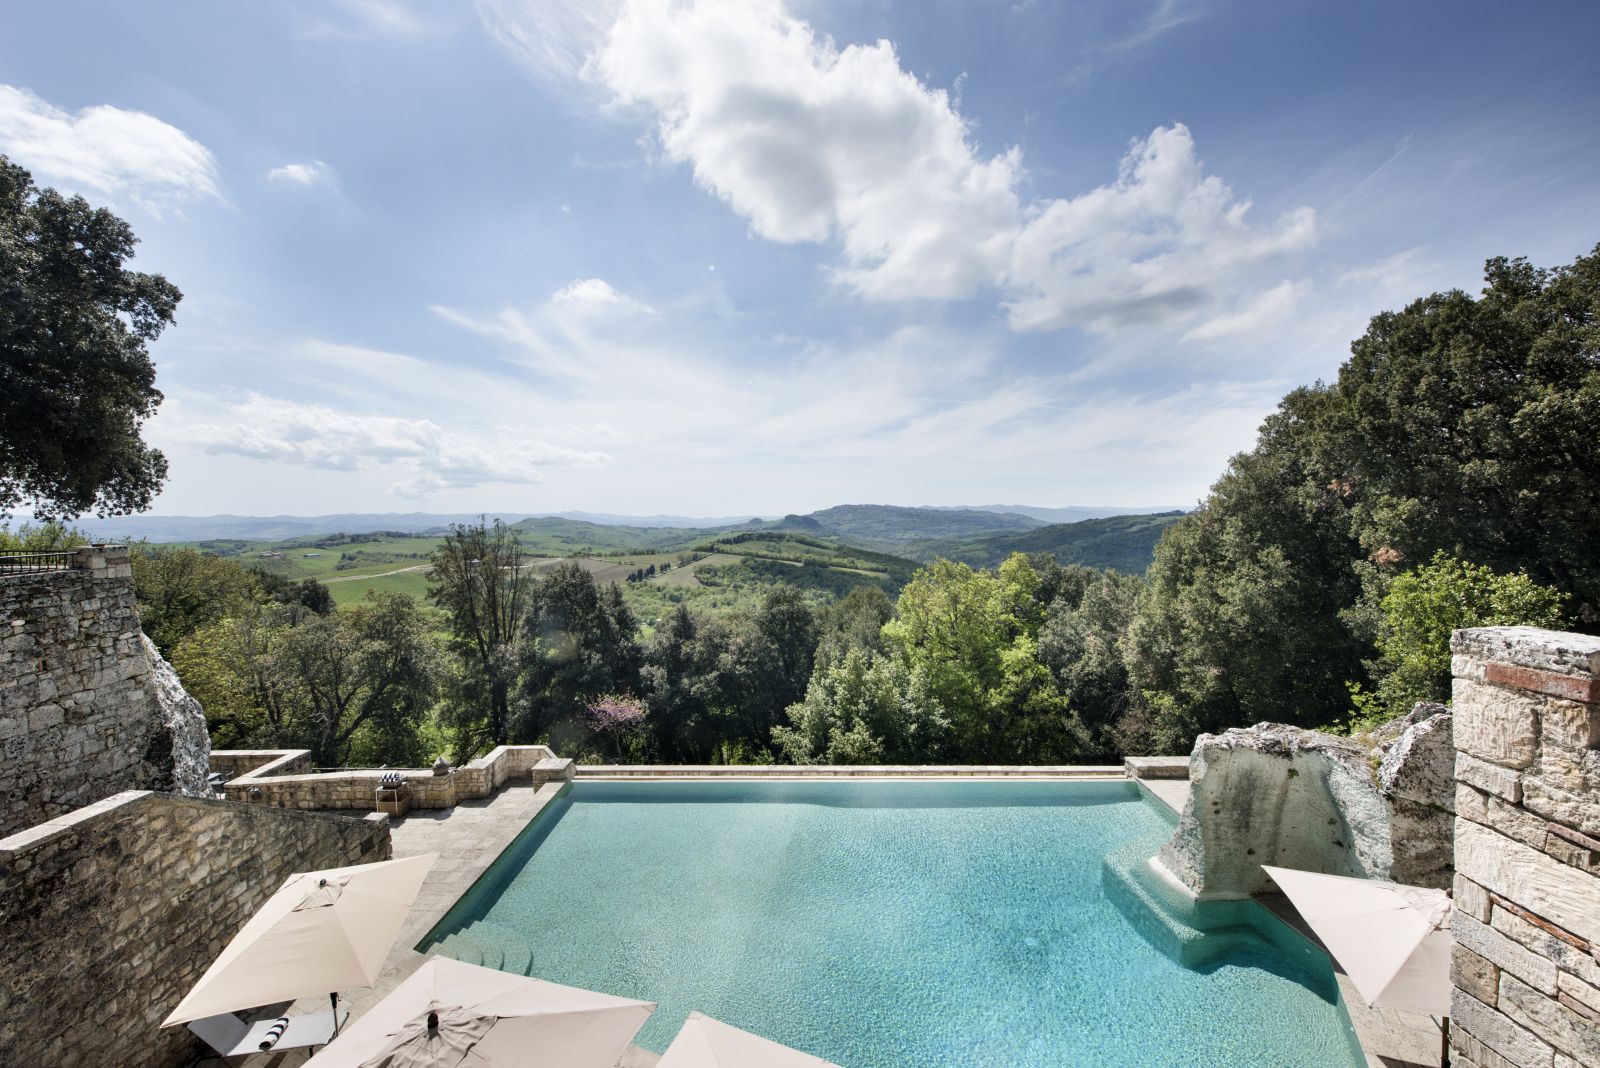 Swimming pool and views at the Borgo Pignano in Tuscany